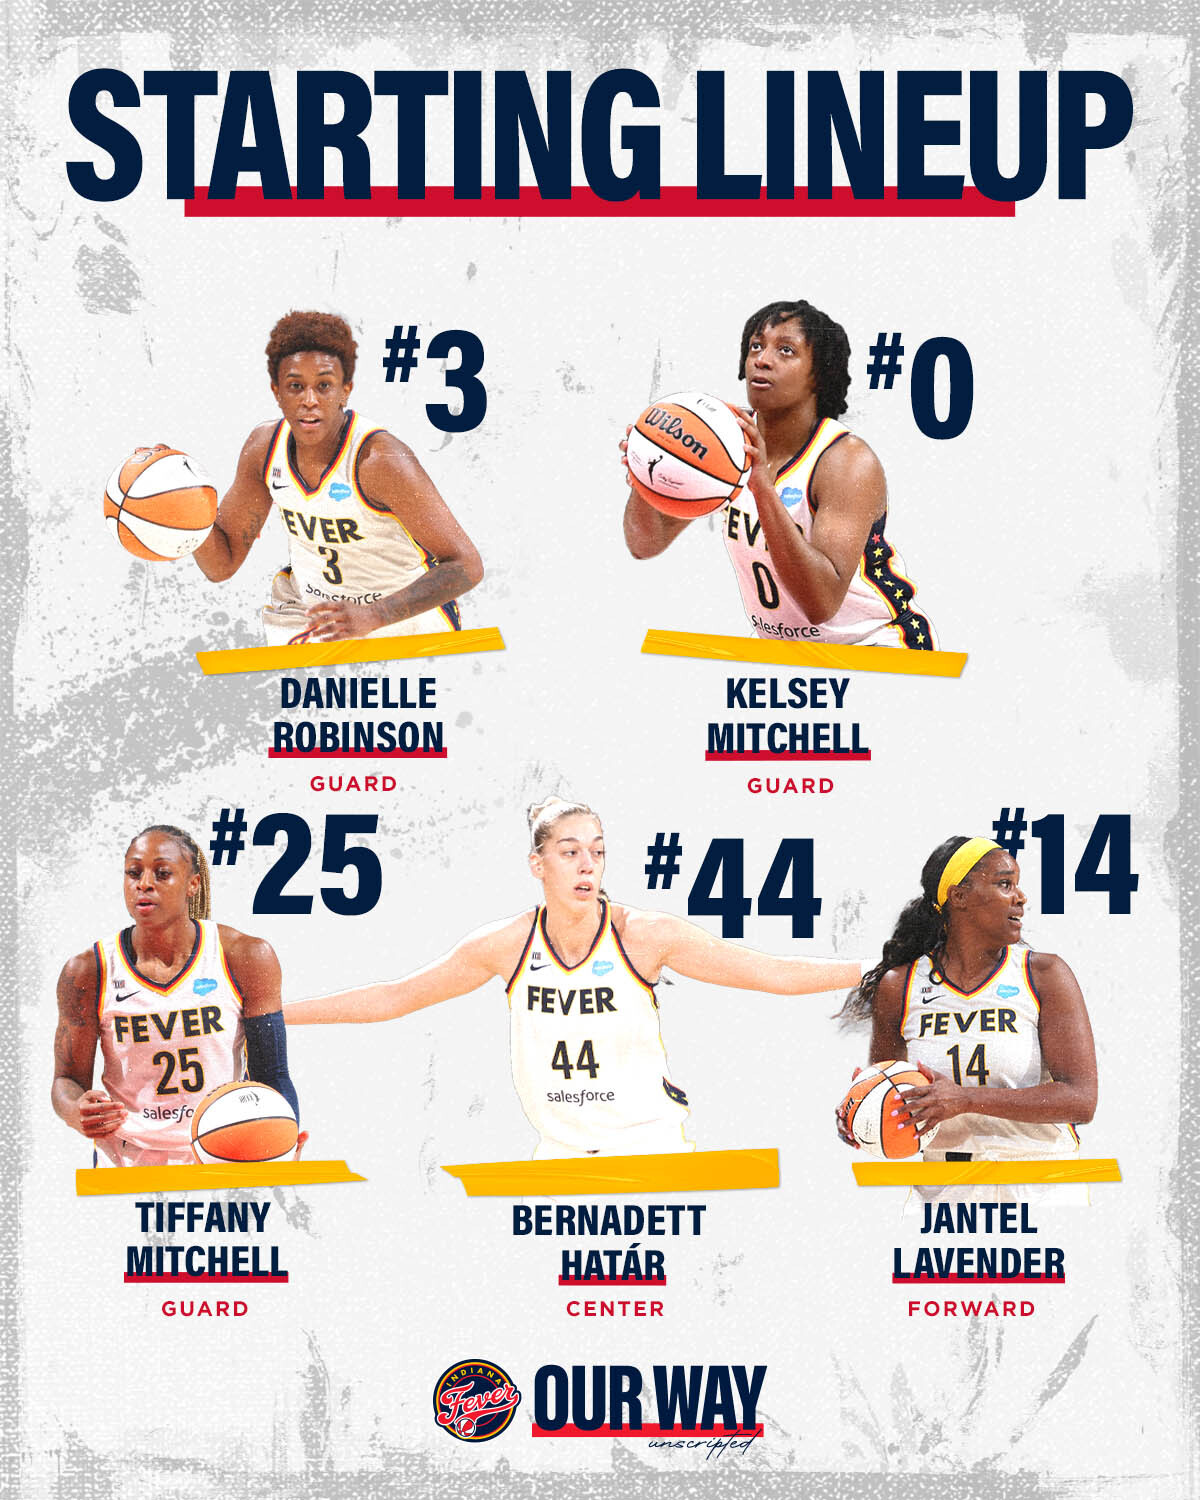 Indiana Fever ⛹️‍♀️🏀 on Twitter "Betti joins the starting lineup for